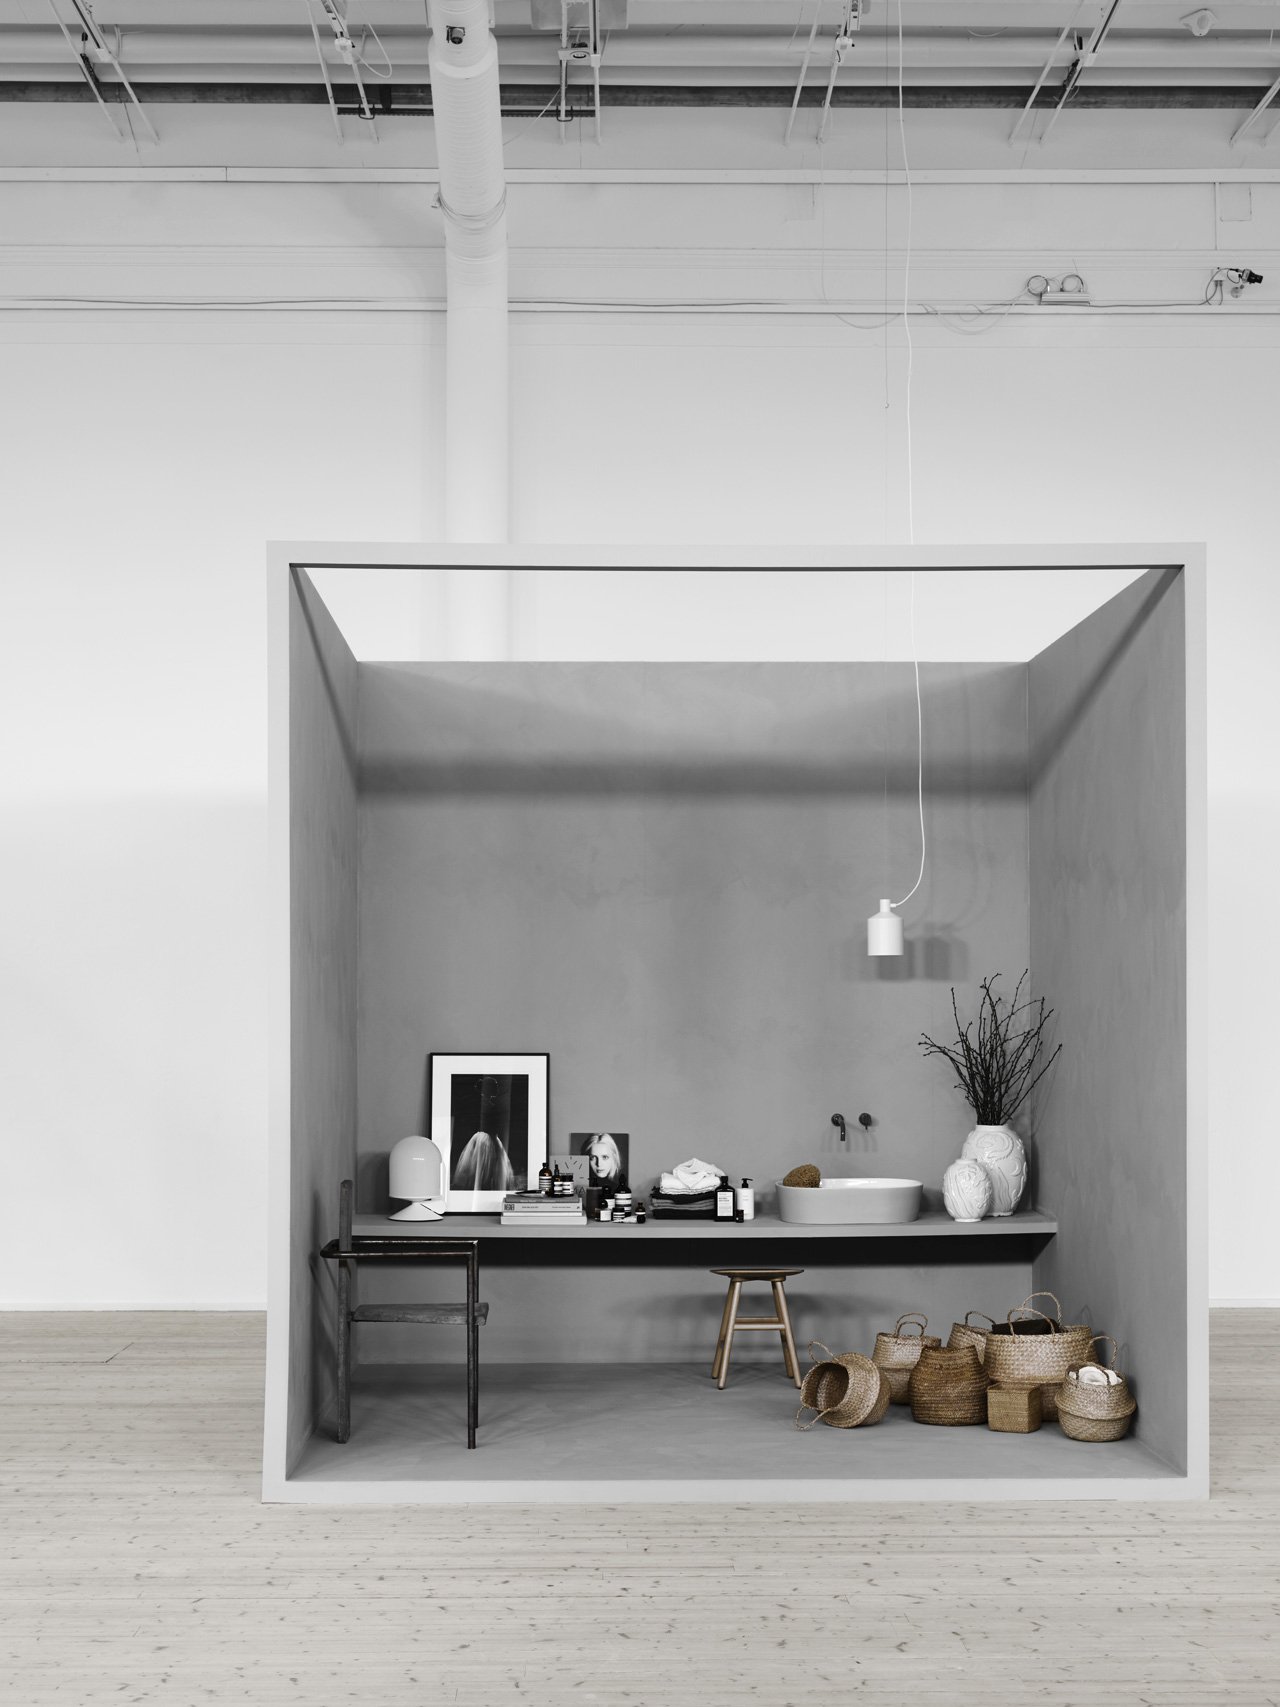 Residence Magazine awarded NOTE DESIGN STUDIO as the Designer of the Year In 2015 and during Stockholm Design Week 2016 an exhibition was presented at the architecture museum ArkDes in Stockholm, curated by Lotta Agaton, one of Sweden’s leading stylists.